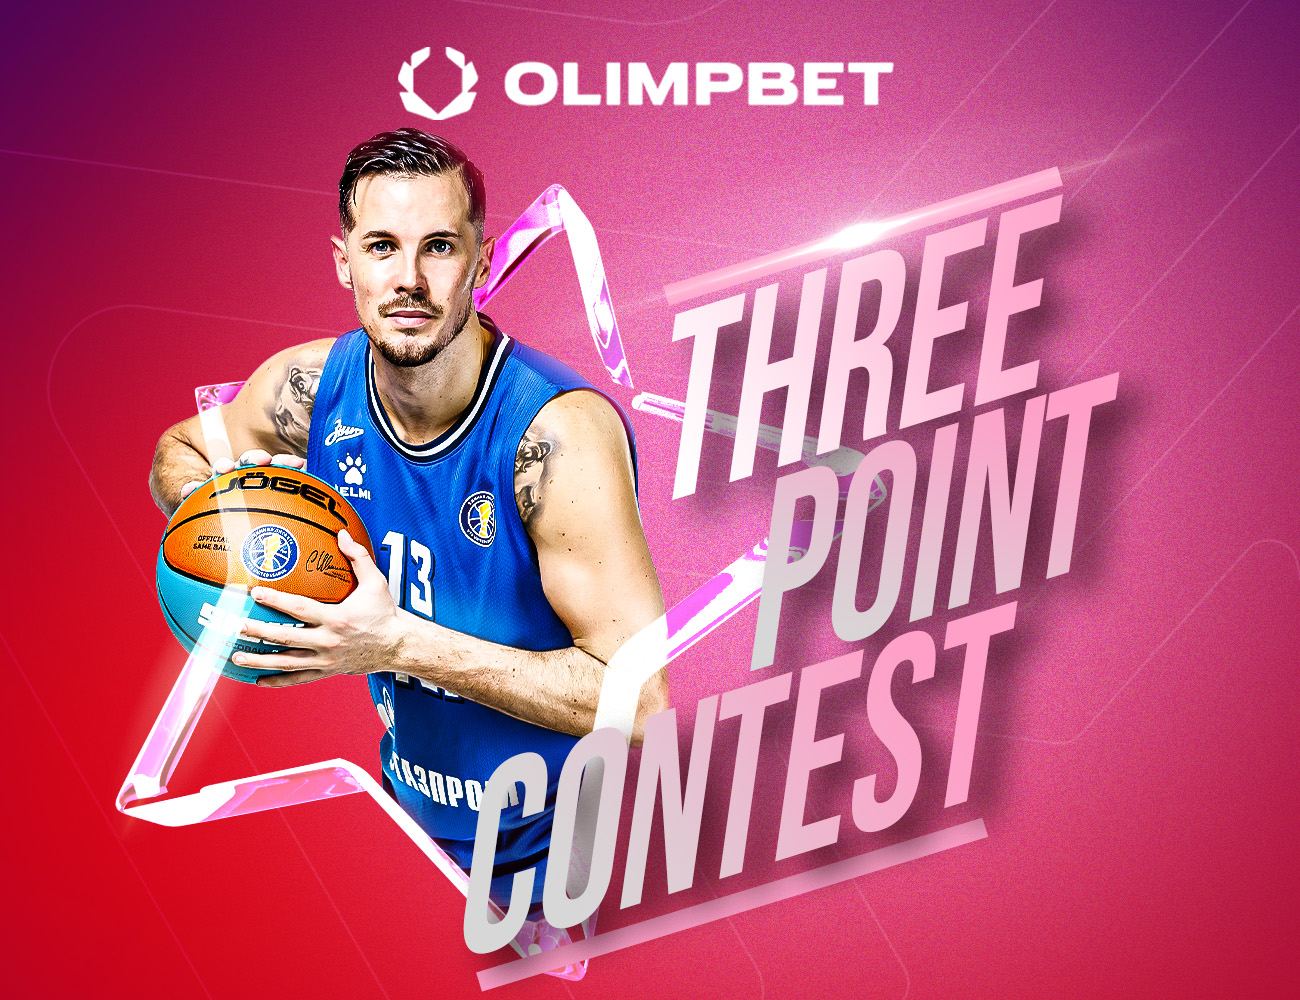 Thomas Heurtel will participate in the Olimpbet Three-Point Contest